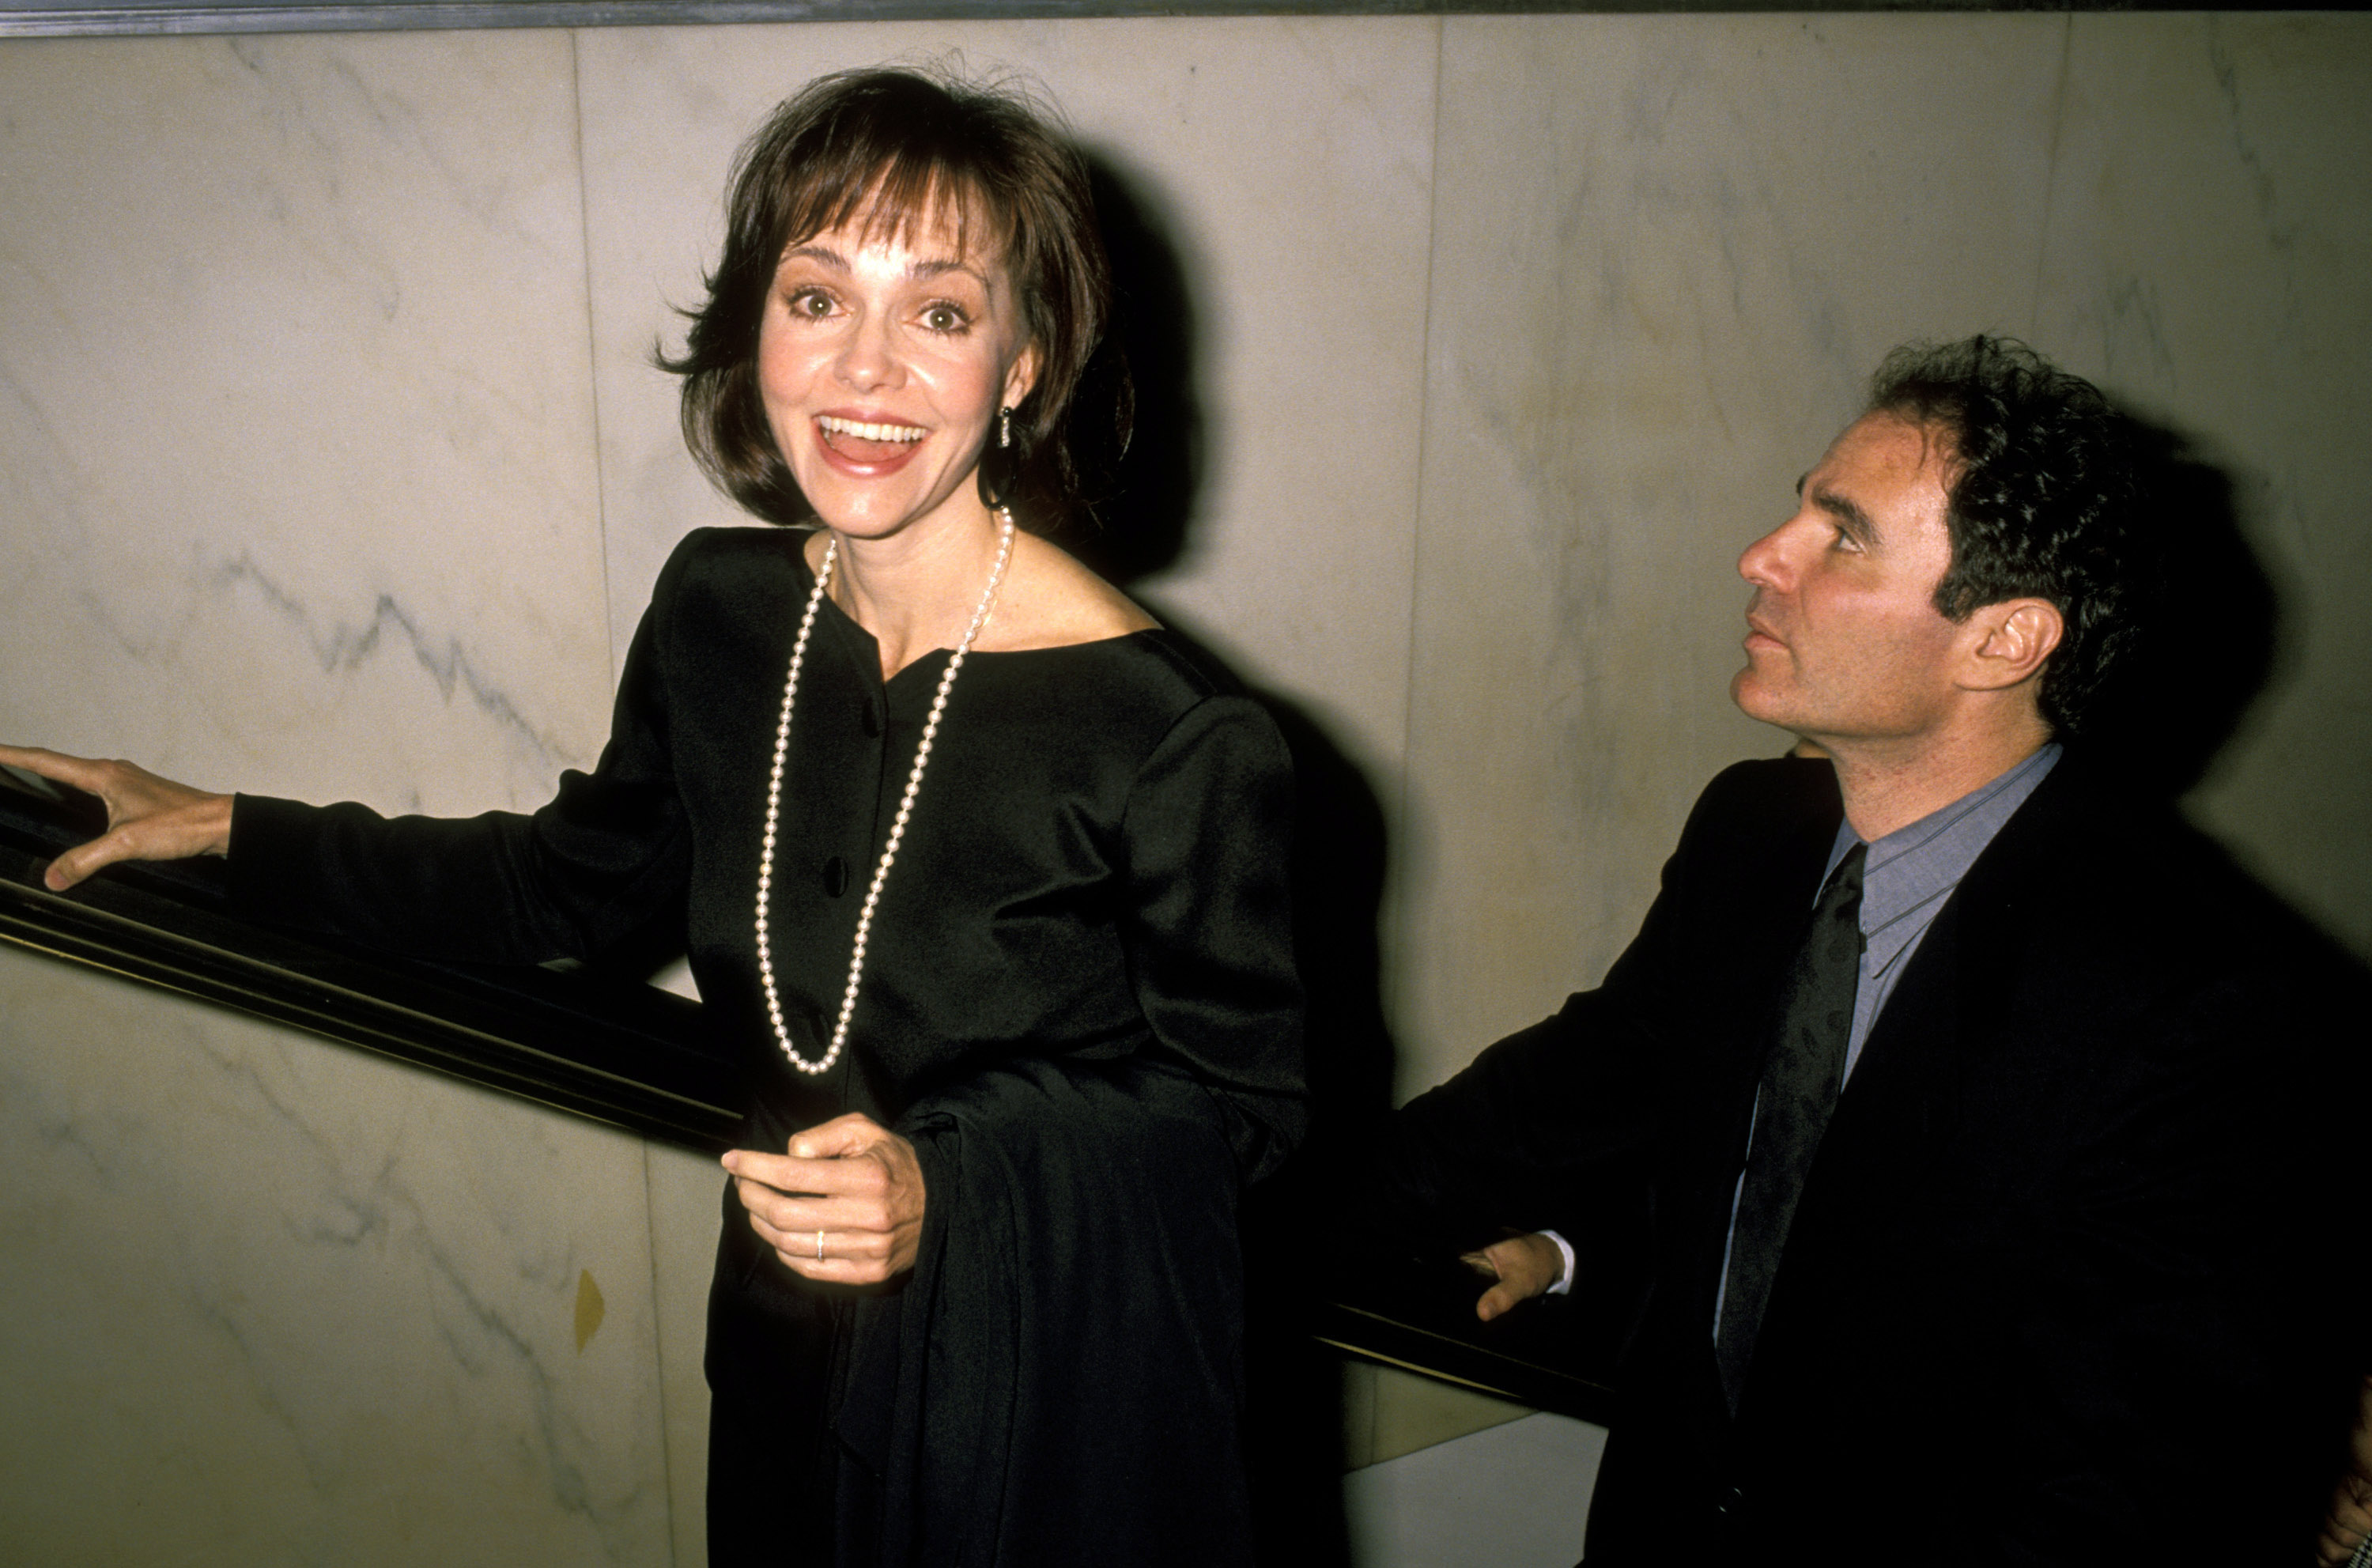 Sally Field and Husband Alan Greisman during Premiere Party for "Steel Magnolias" at New York Hilton Hotel in New York City on November 5, 1989. | Source: Getty Images